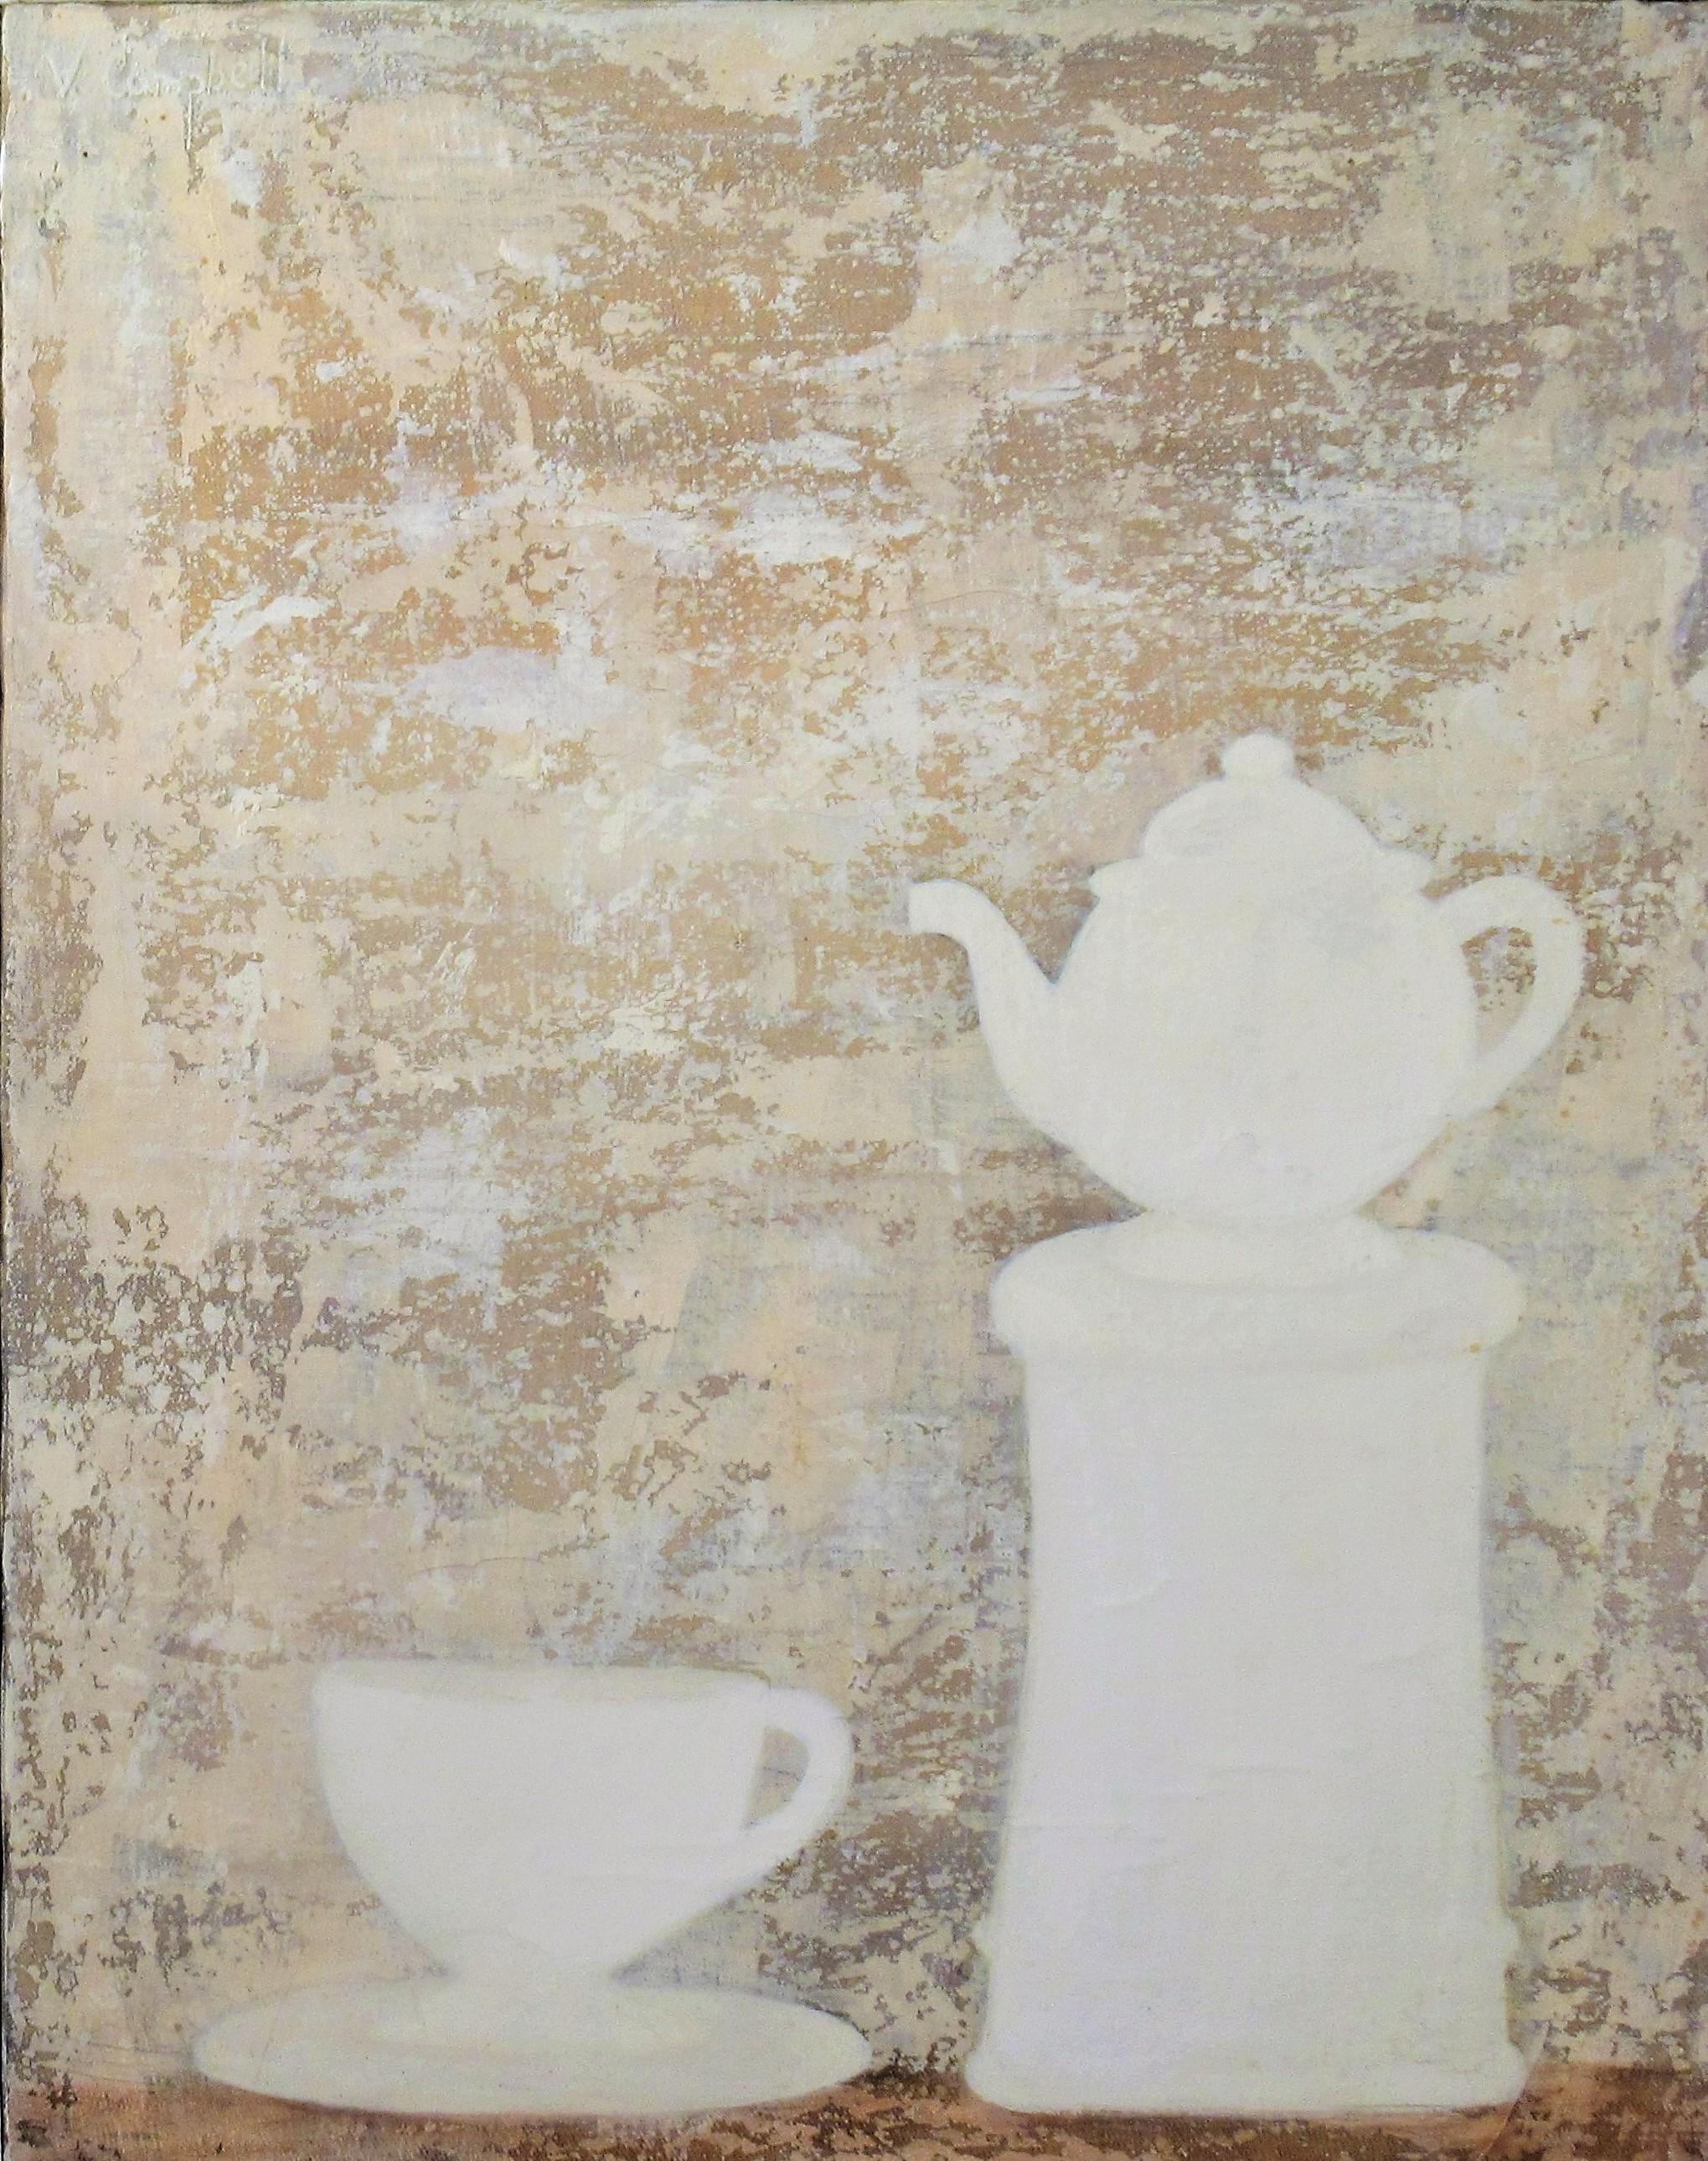 Buova Wotte (Still life with Tea Pot) - Painting by Virginia Campbell